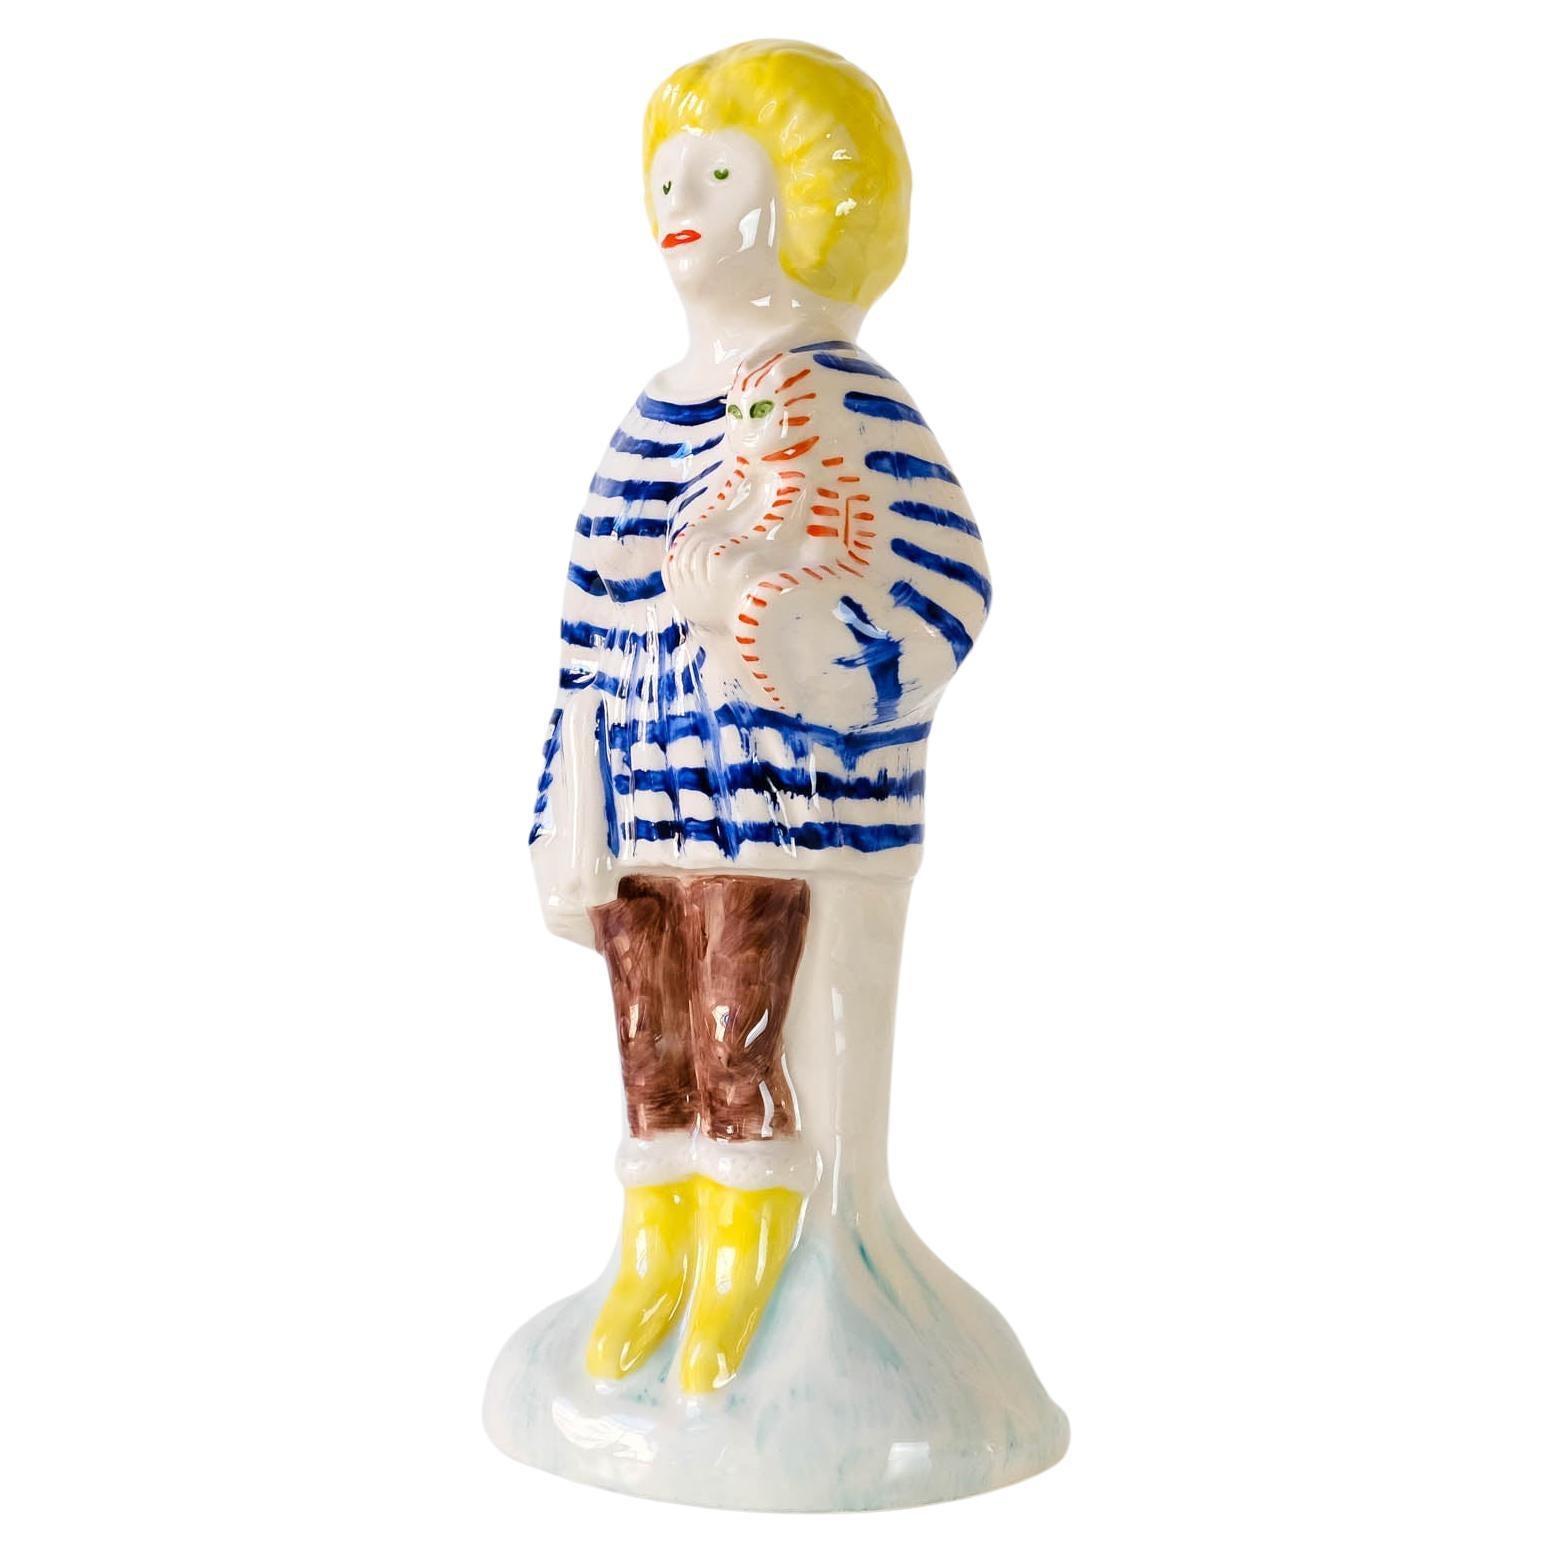 Grayson Perry "Home Worker" Staffordshire Figure 'Design 4', 2021 For Sale